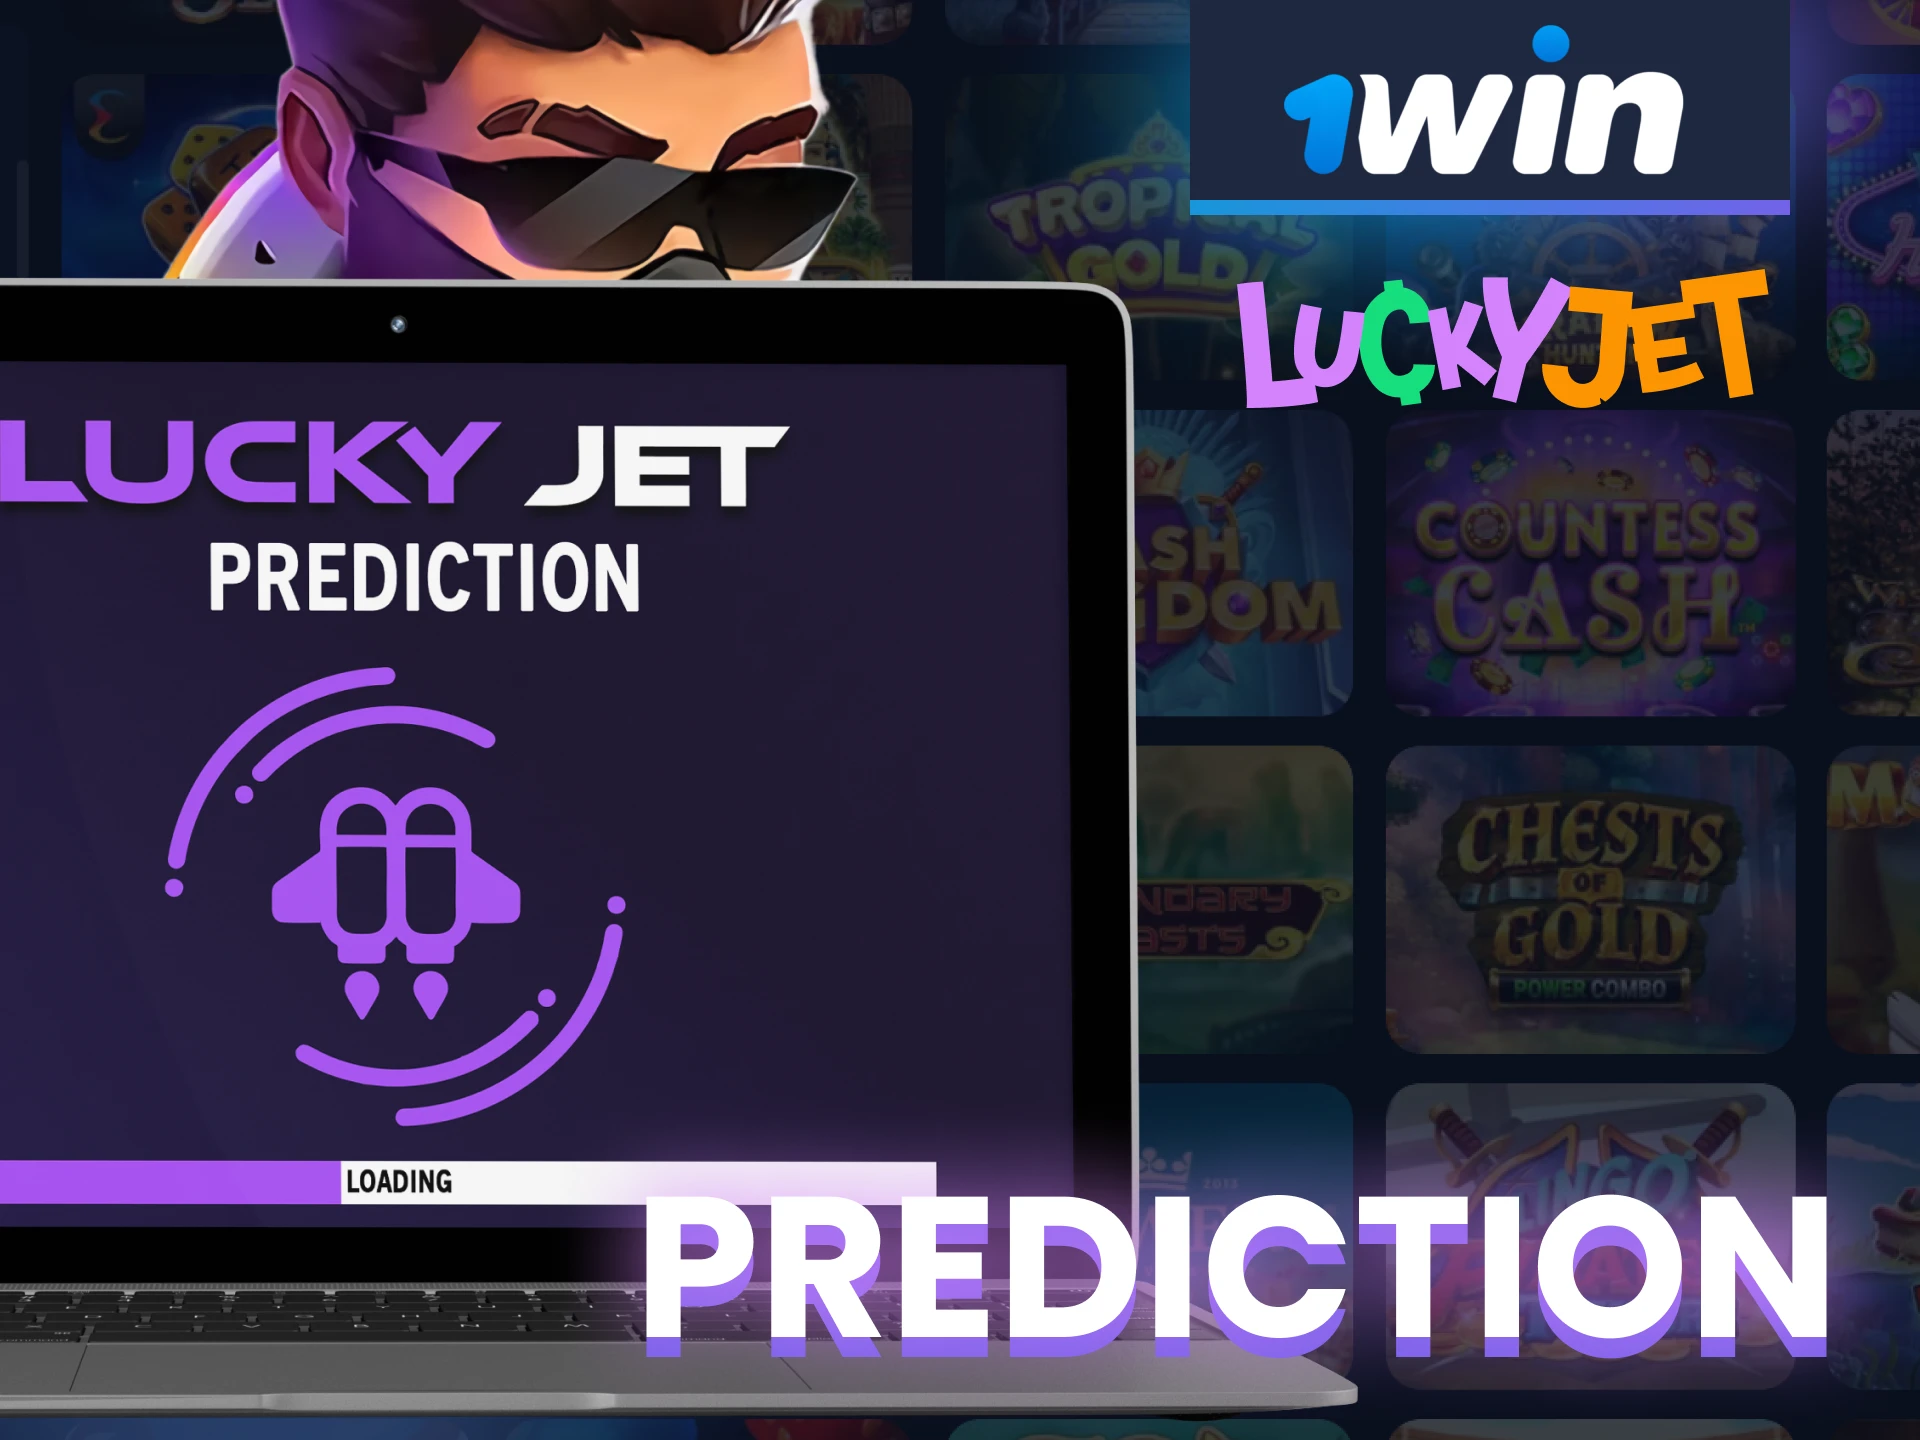 Find out about the predictor Lucky Jet on the 1win website.